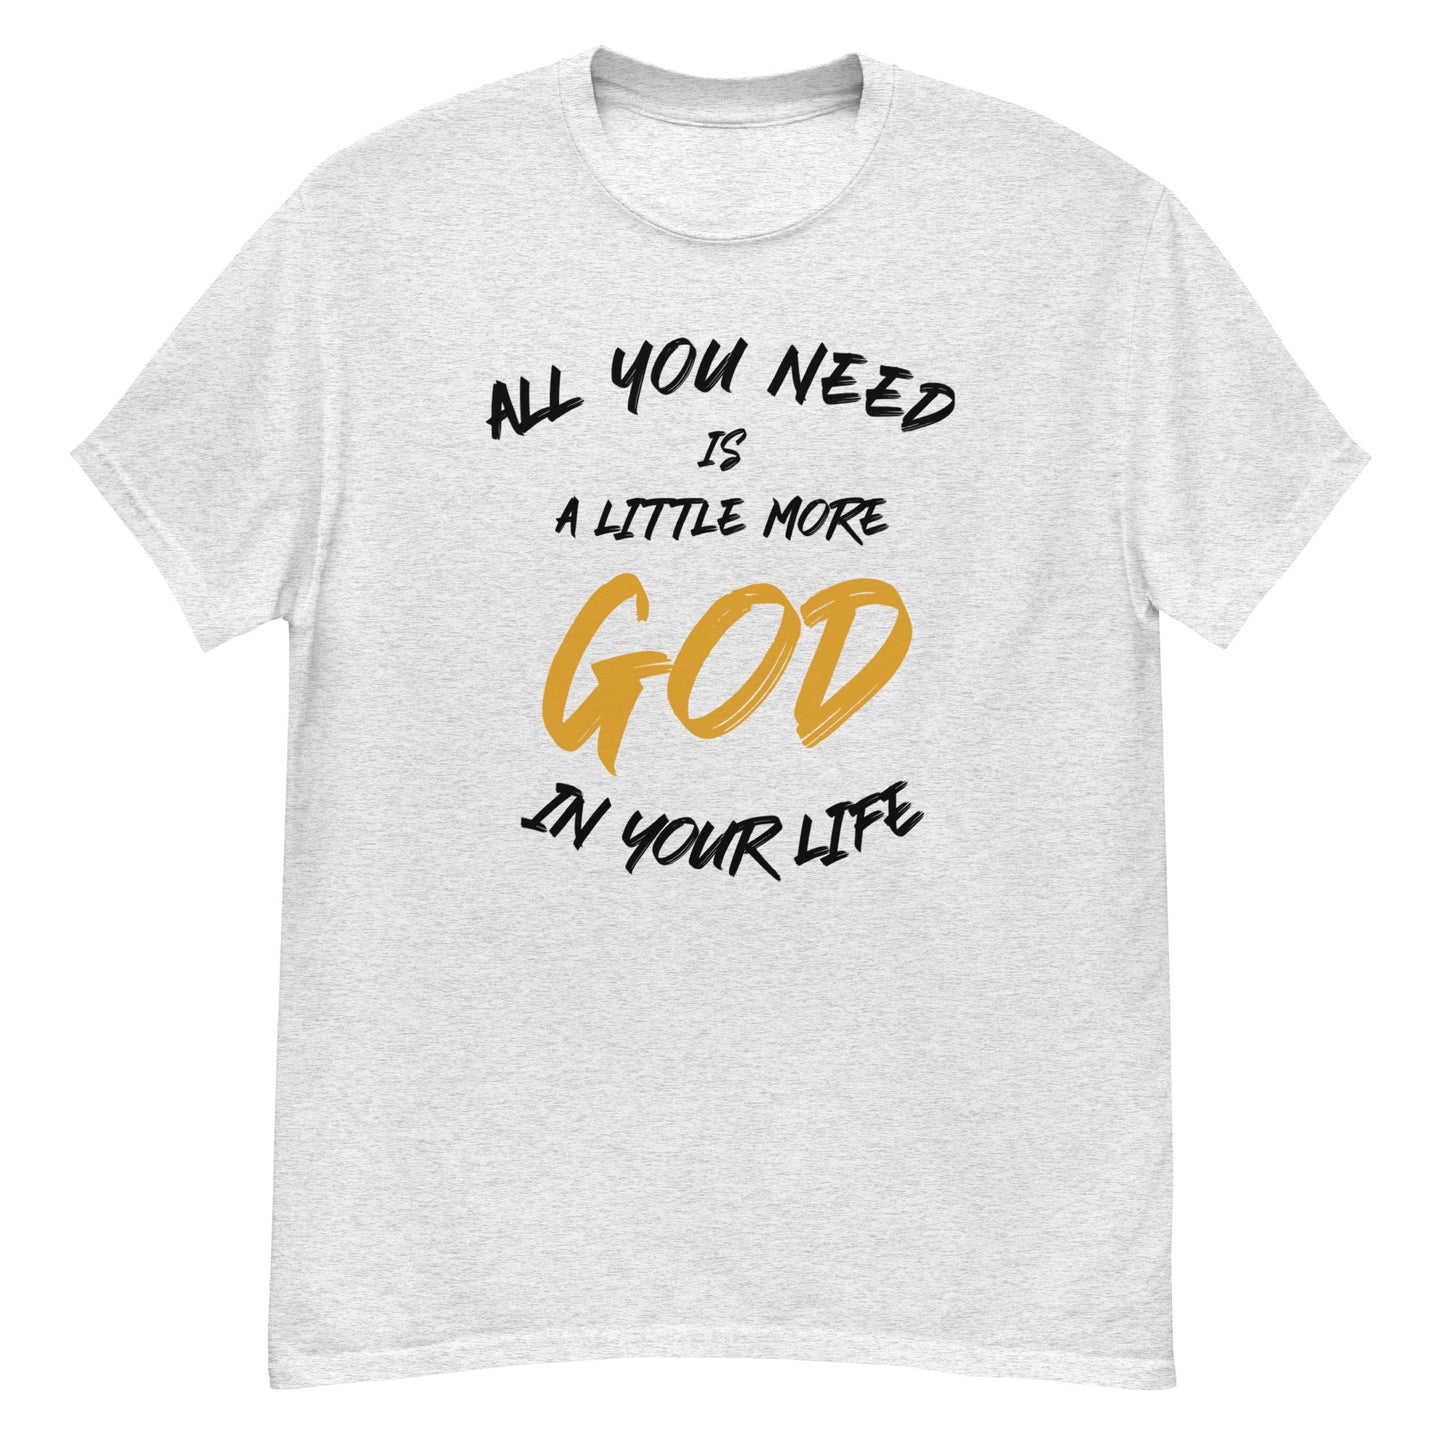 All you need is a little more God in your life classic tee (Black lettering)